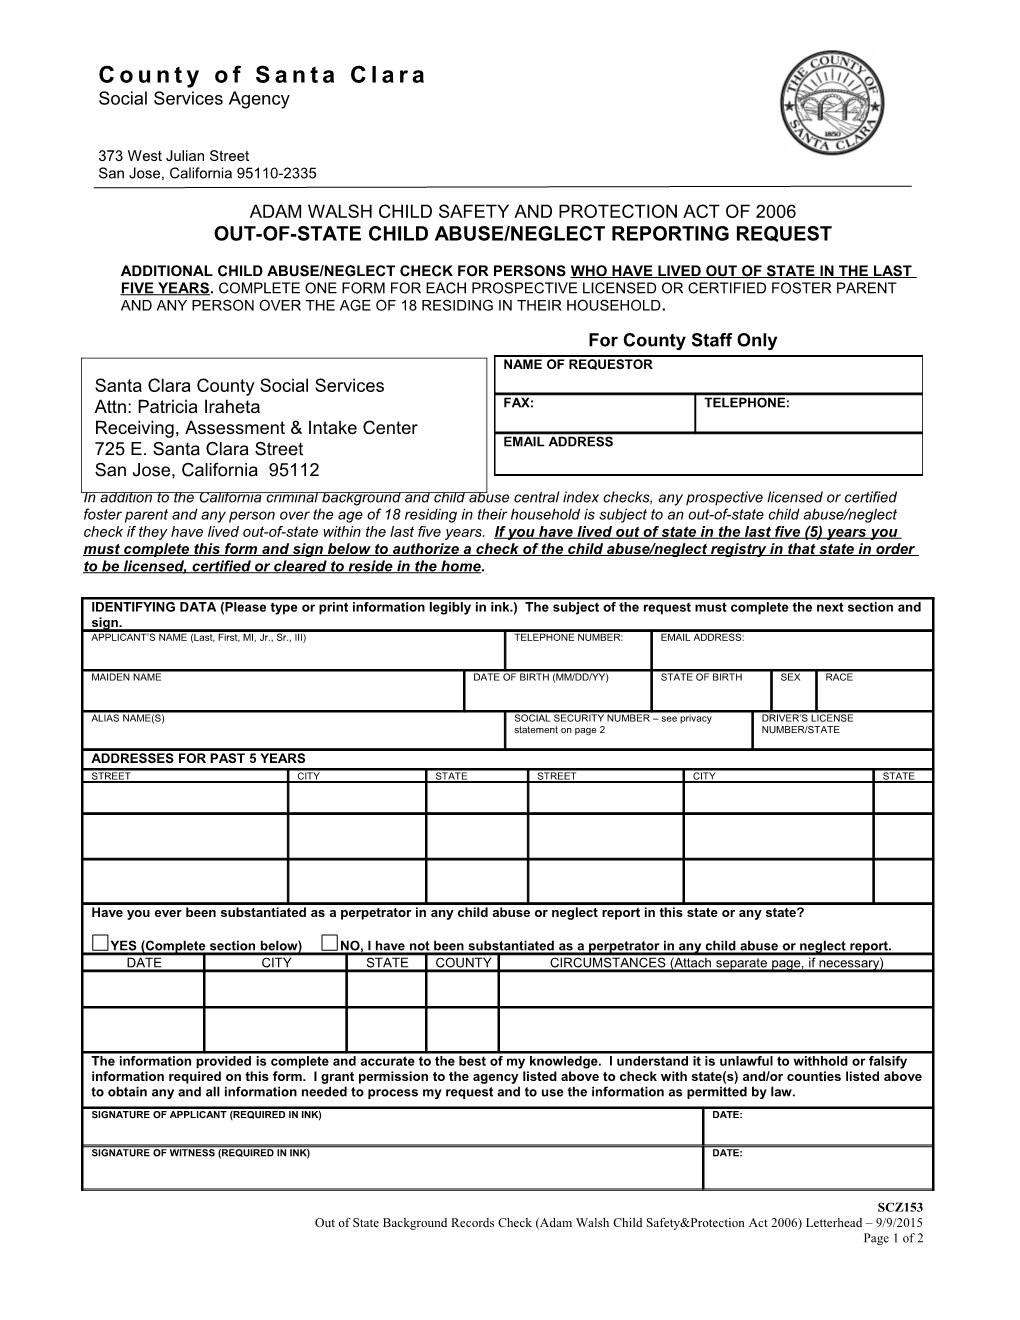 Out-Of-State Child Abuse/Neglect Reporting Request